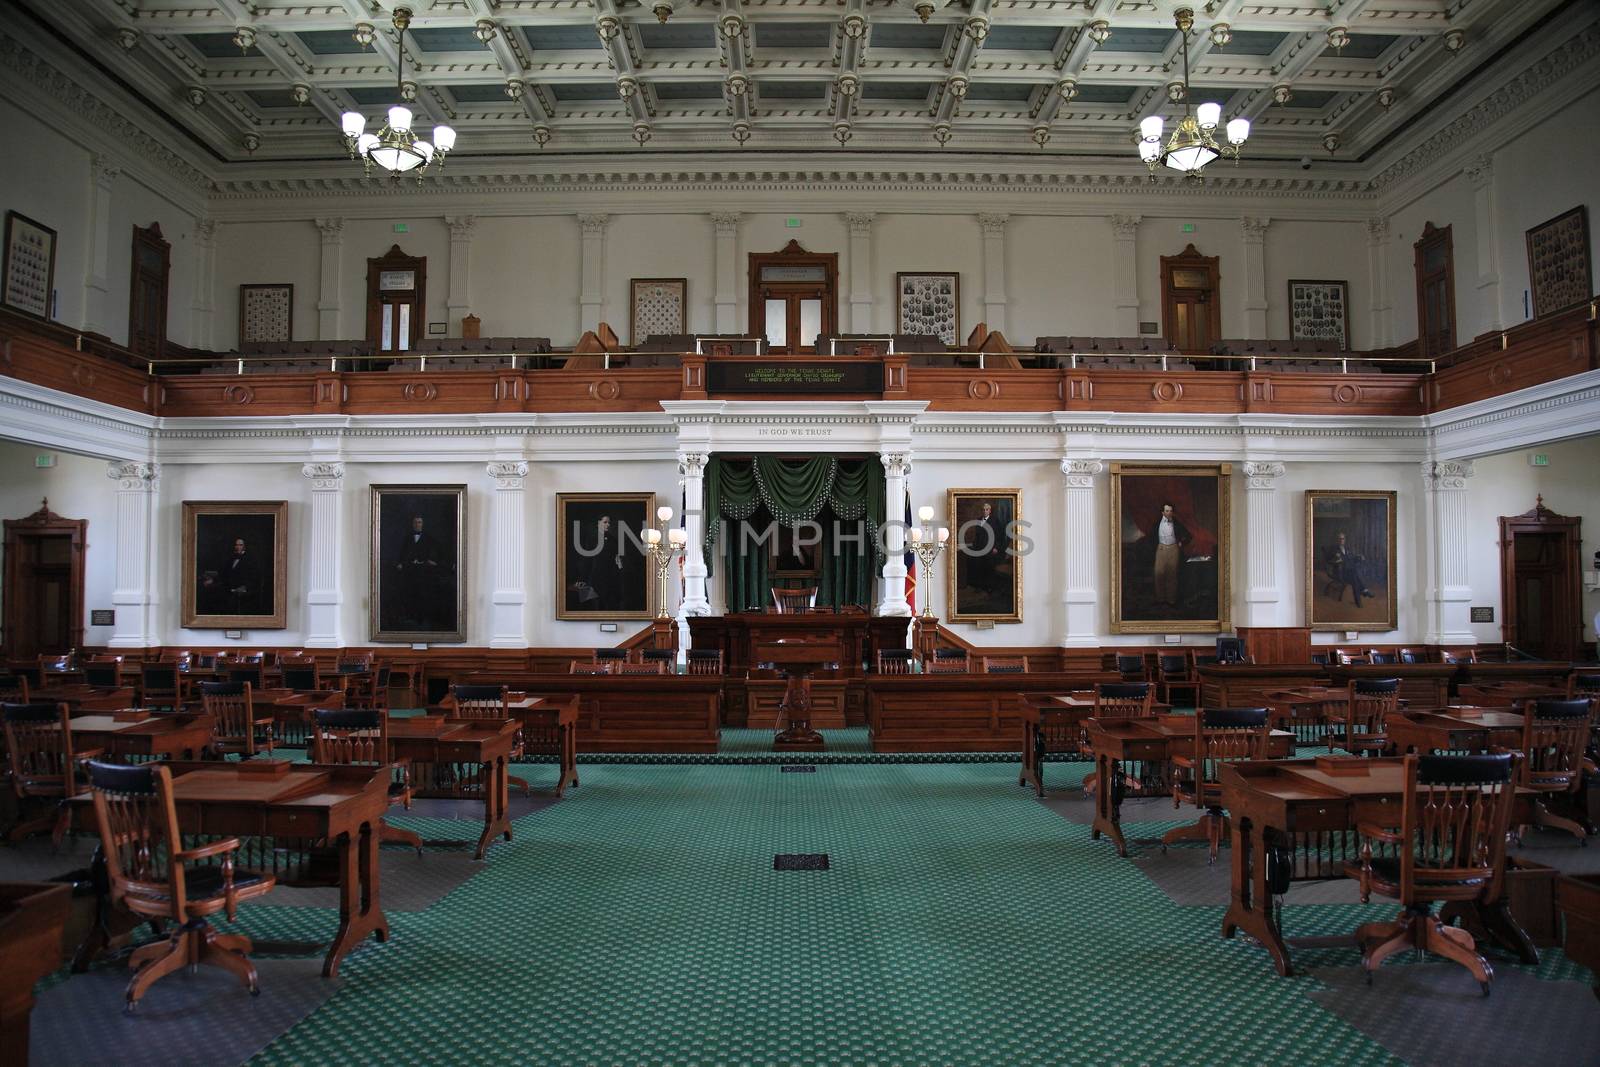 Desks and chairs in the historic senate chamber located in the Texas capital building in Austin.